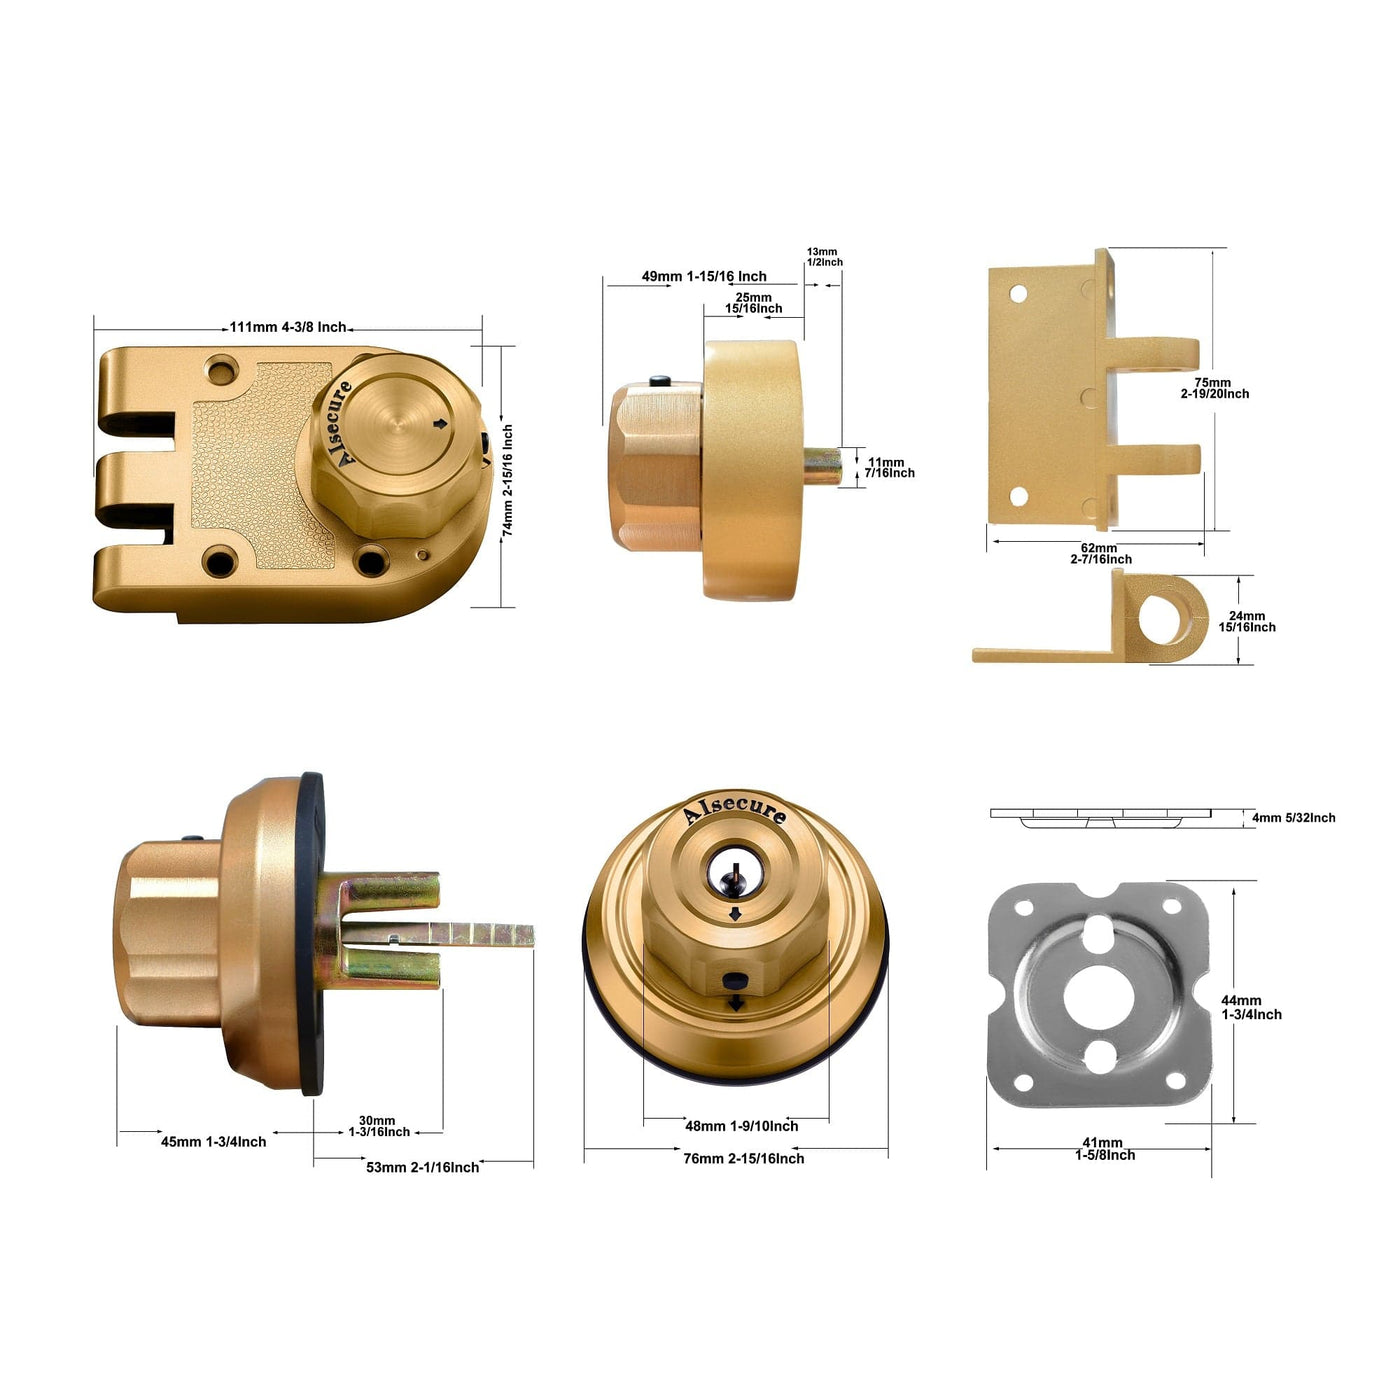 2*A9 AIsecure Jimmy Proof Lock (stainless steel casting) --- Brass Key alike combo